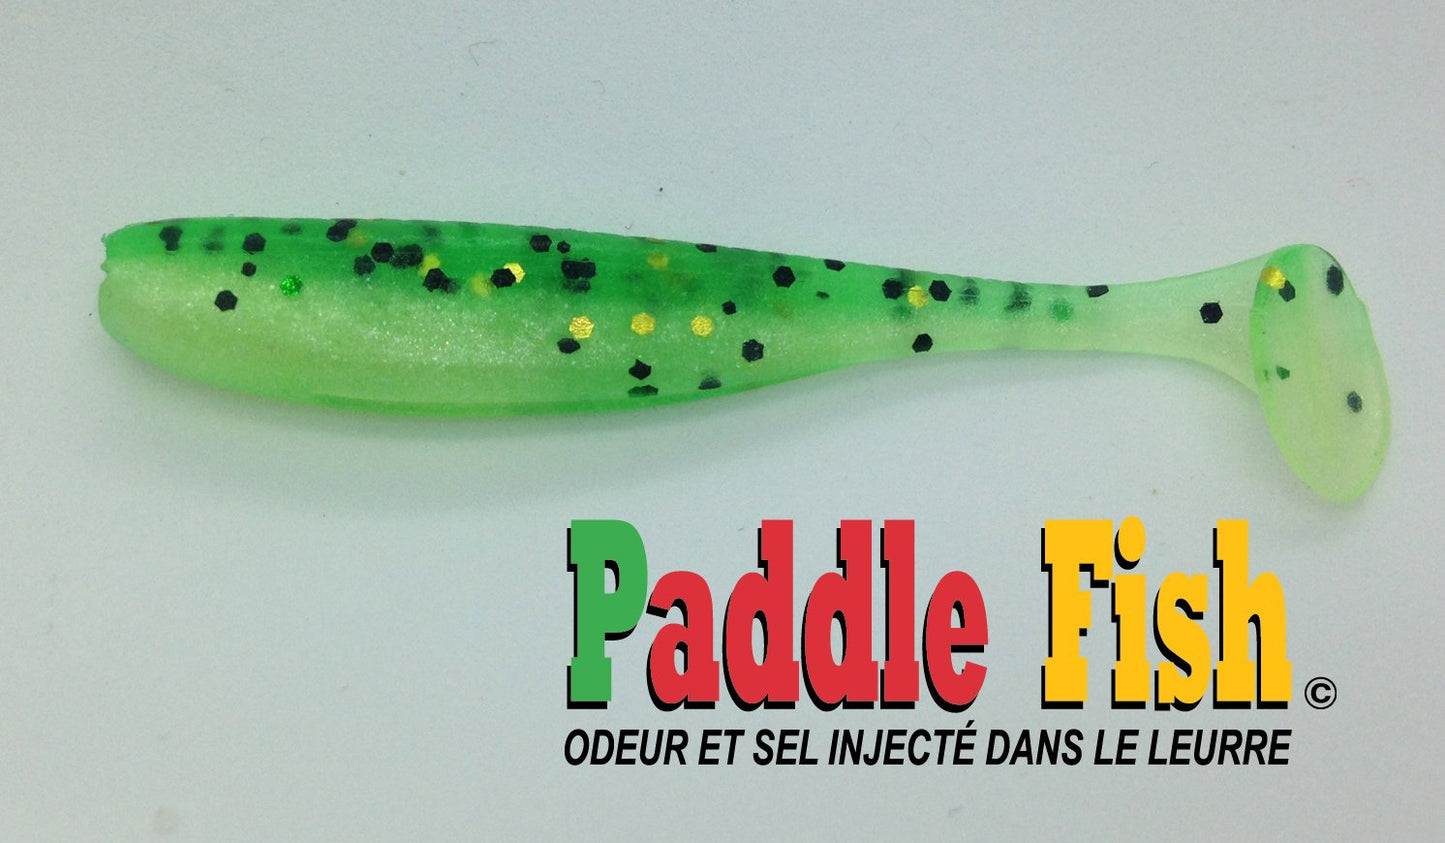 50 Curly Tail Fishing Lures 2.17 inch Bass Crappie Panfish Trout Mandarin Fish Baits, Size: 5.5